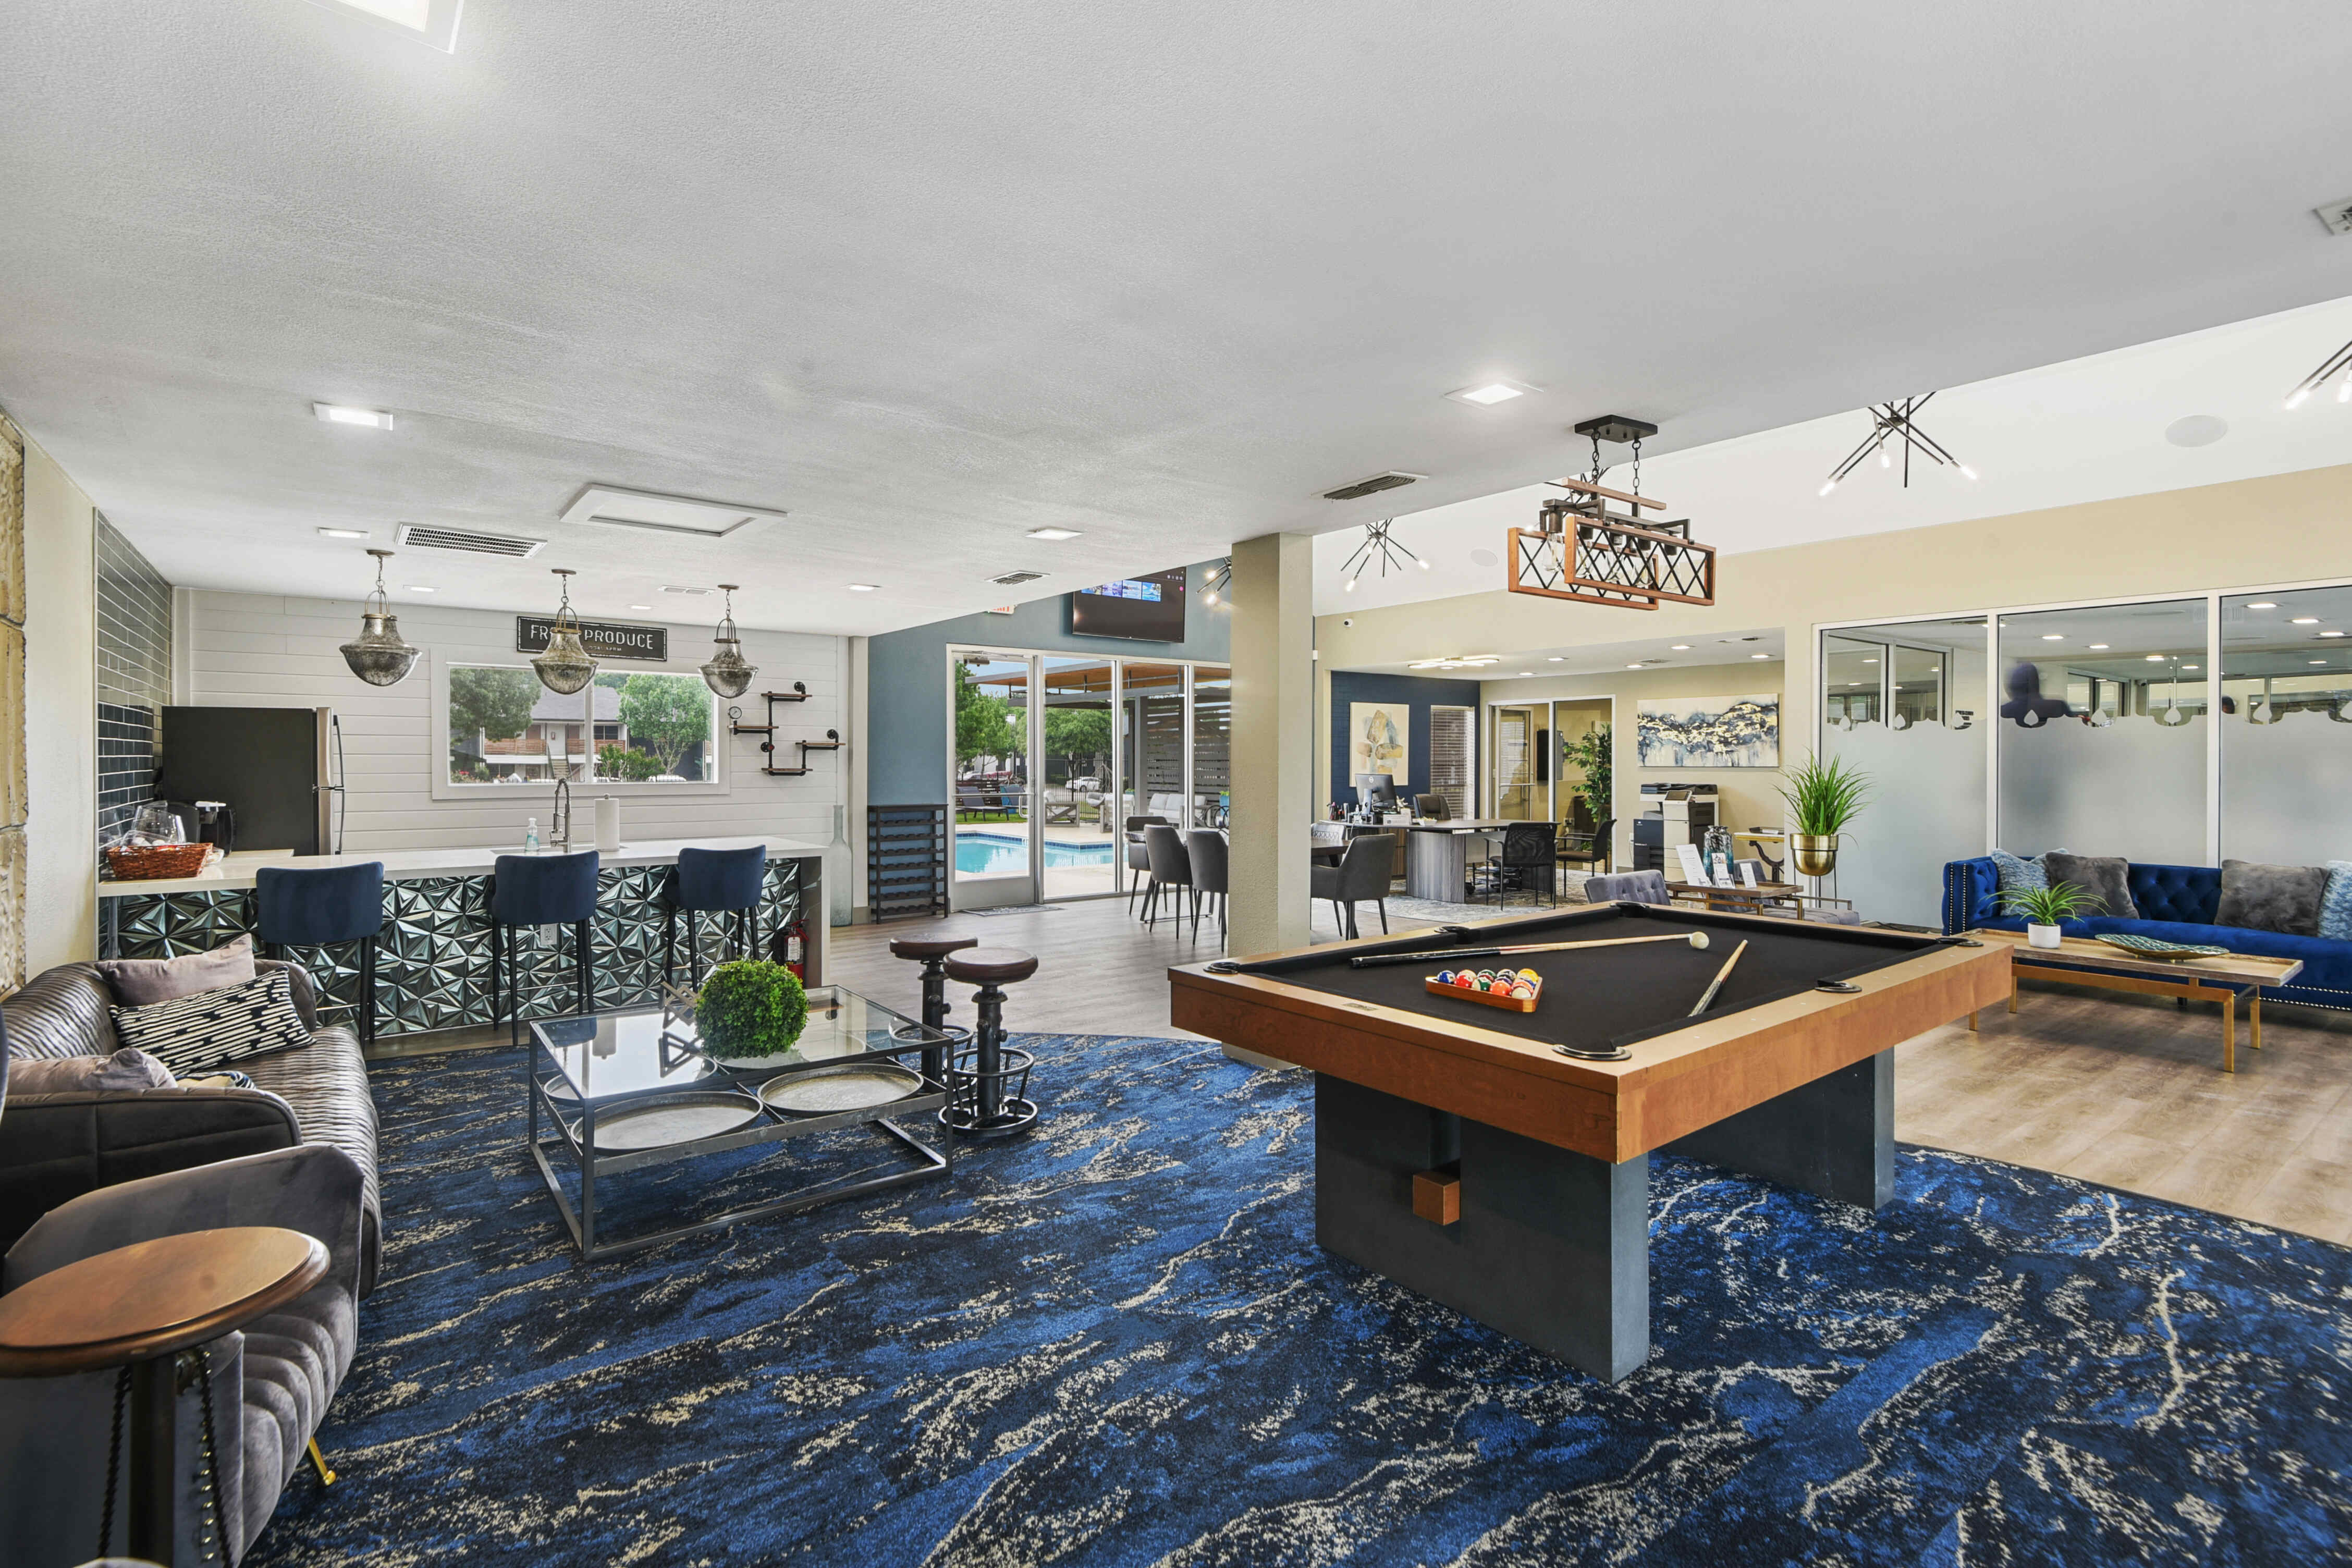 Gaming Area with Billiard Pool Table